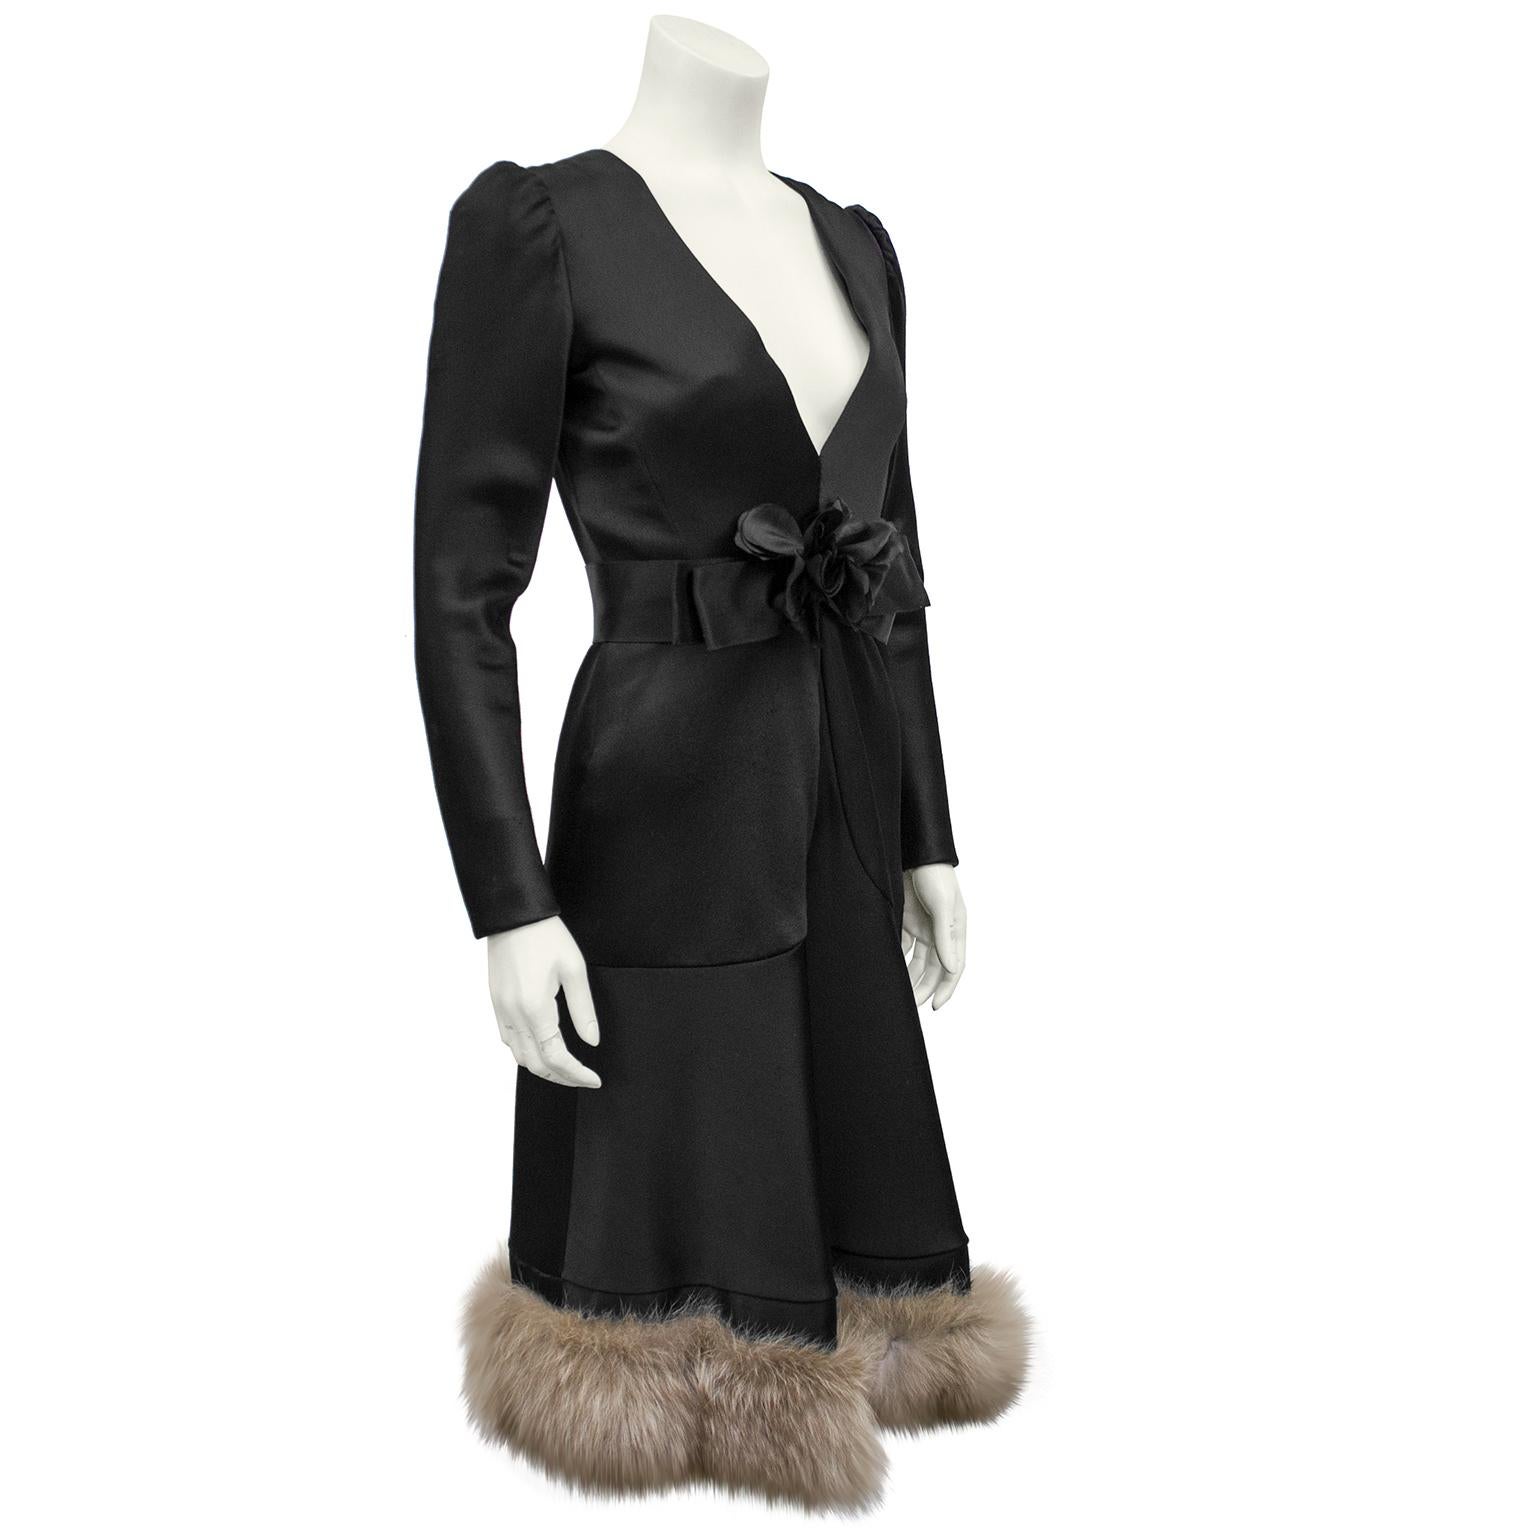 Nina Ricci black satin long sleeve cocktail dress from the 1960s that is to die for. The back has large black satin covered buttons that travel up the back and the front deep V neckline is accented with a wide black satin belt, worn at the natural